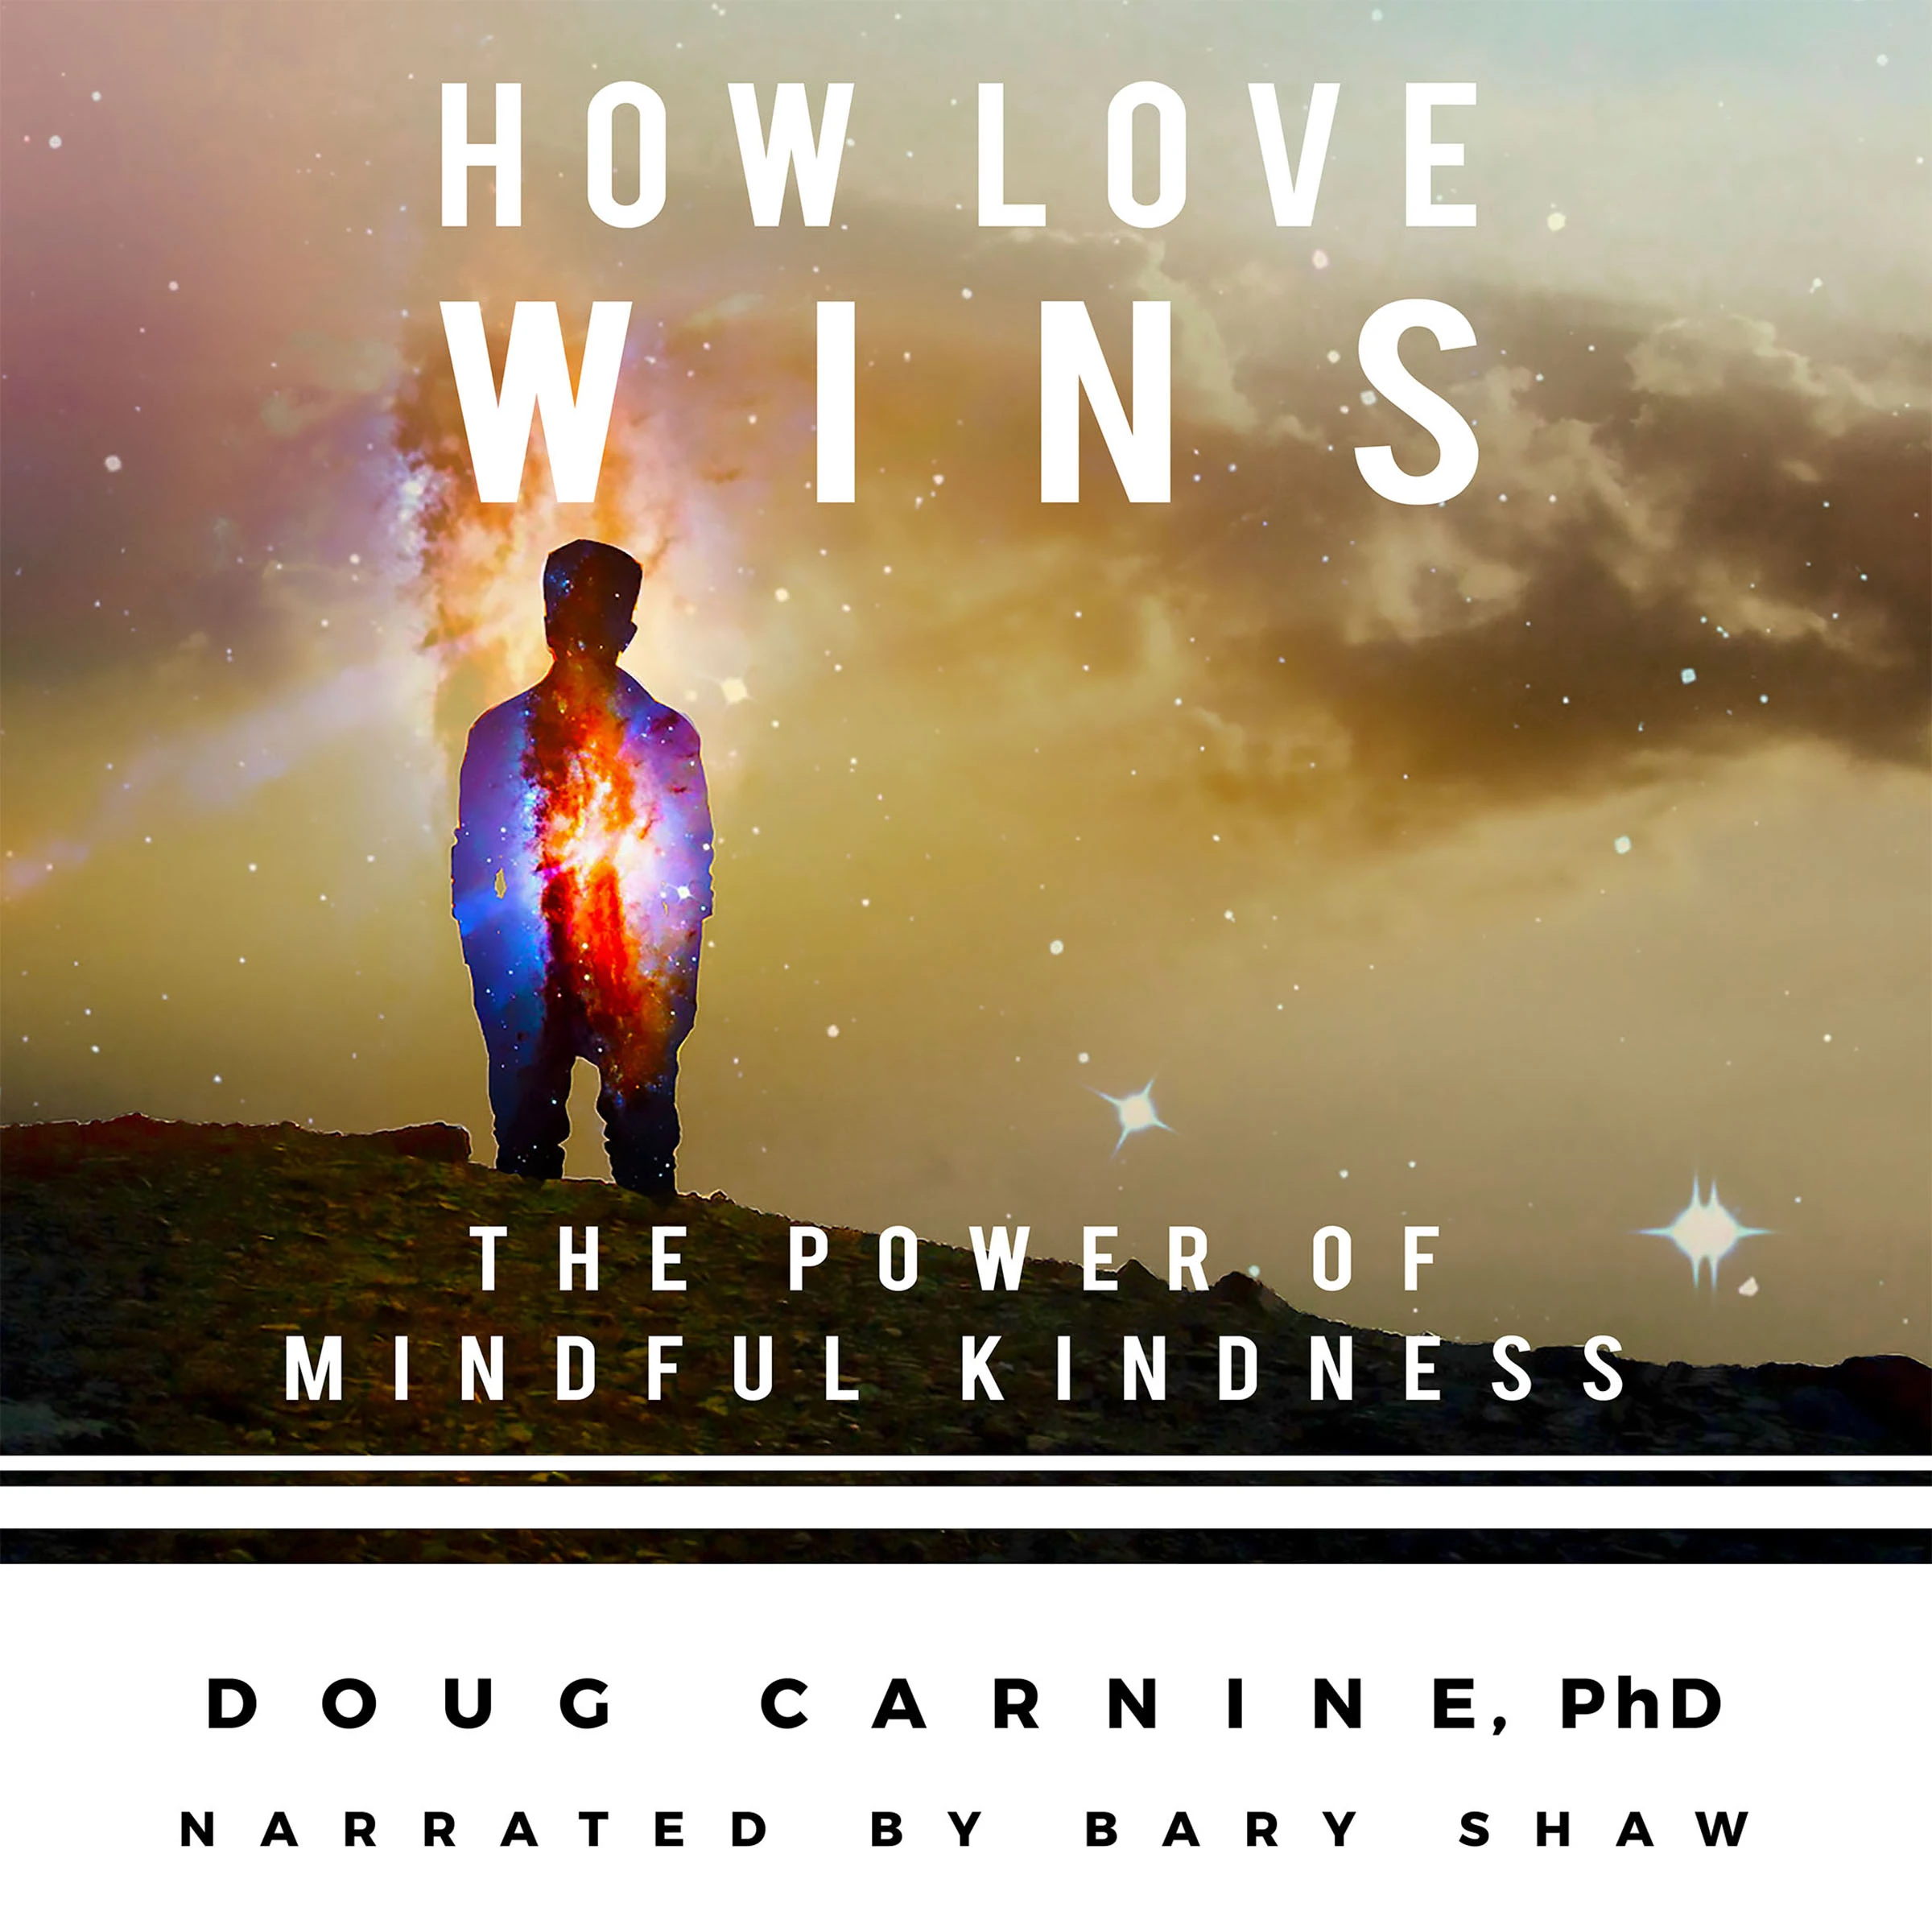 How Love Wins: The Power of Mindful Kindness Audiobook by Doug Carnine